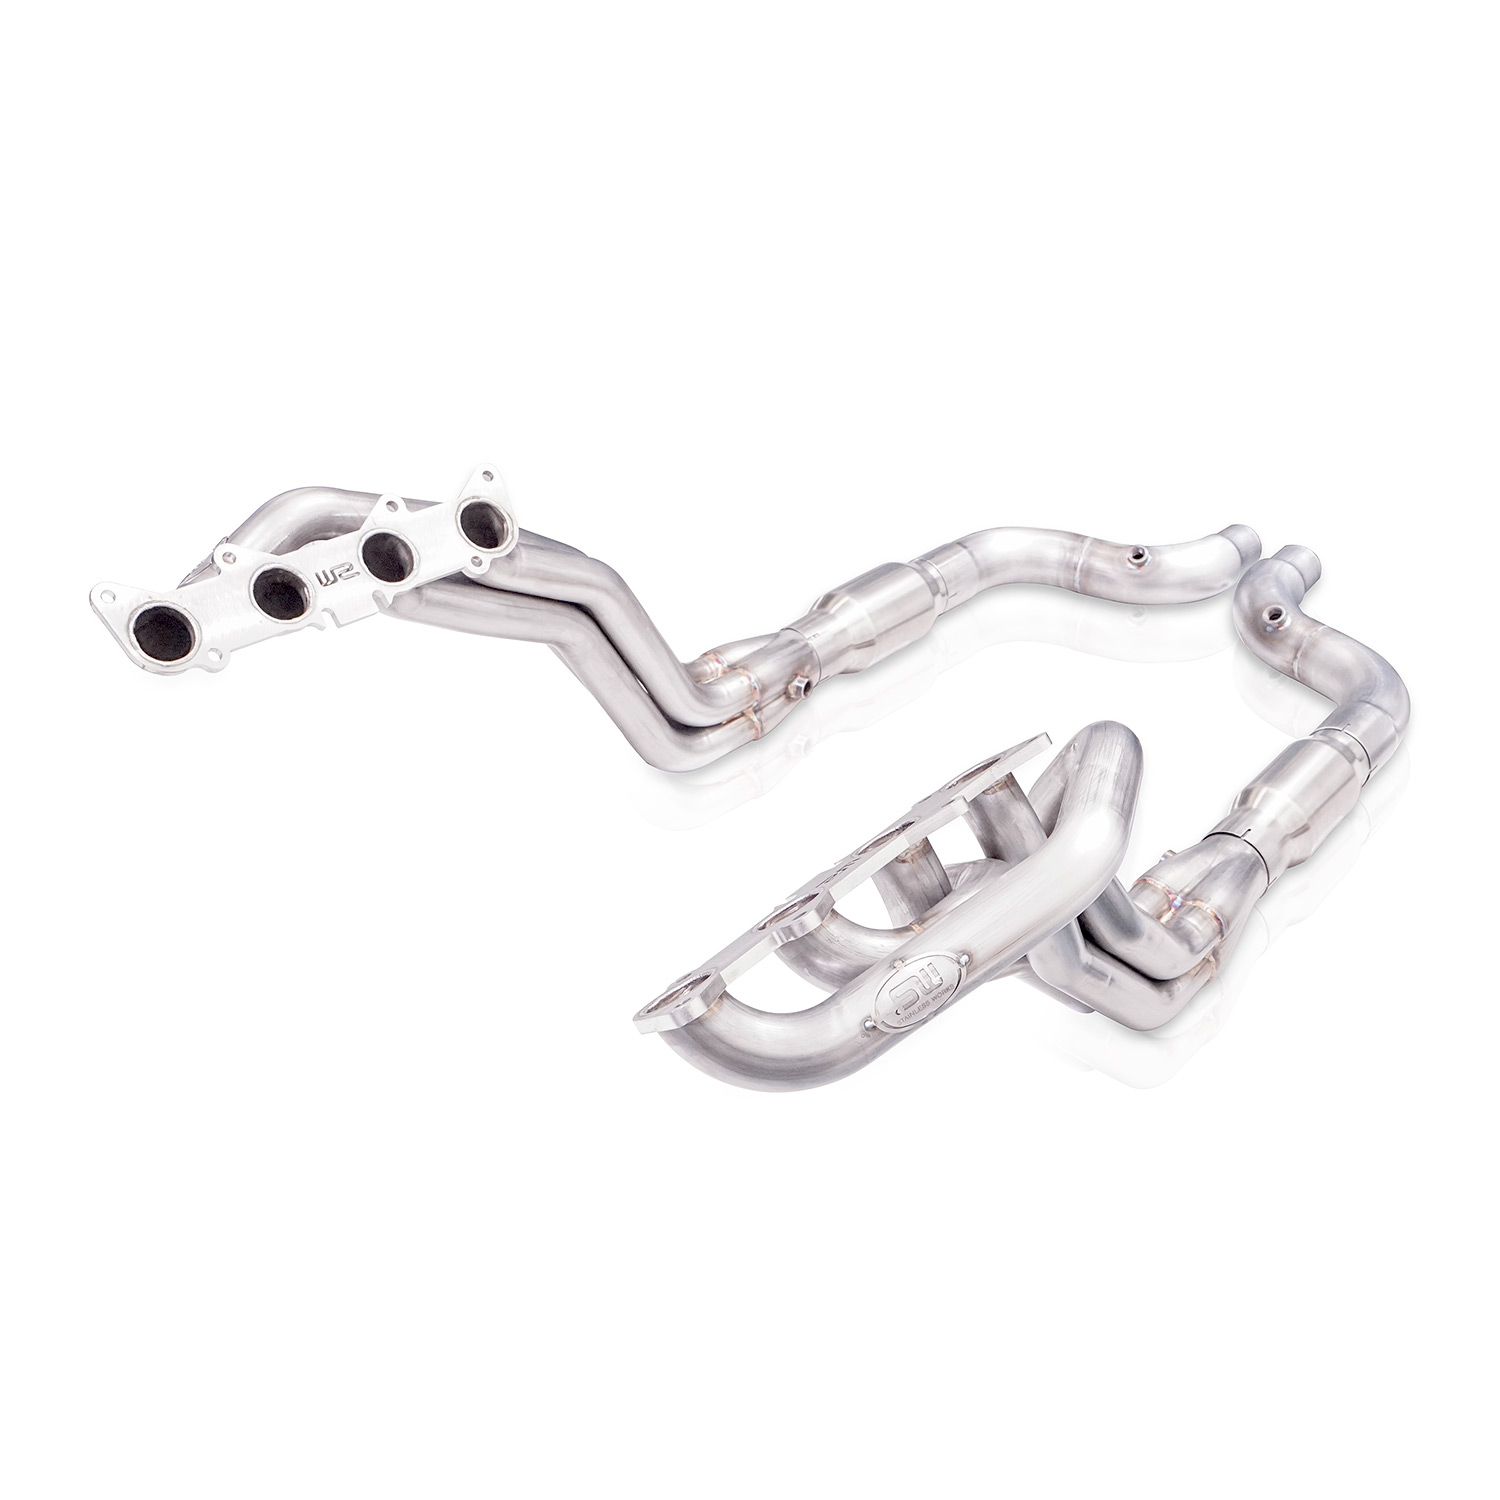 2015-2021 Mustang GT 5.0L SW Headers 1-7/8" With Catted Leads Factory Connect